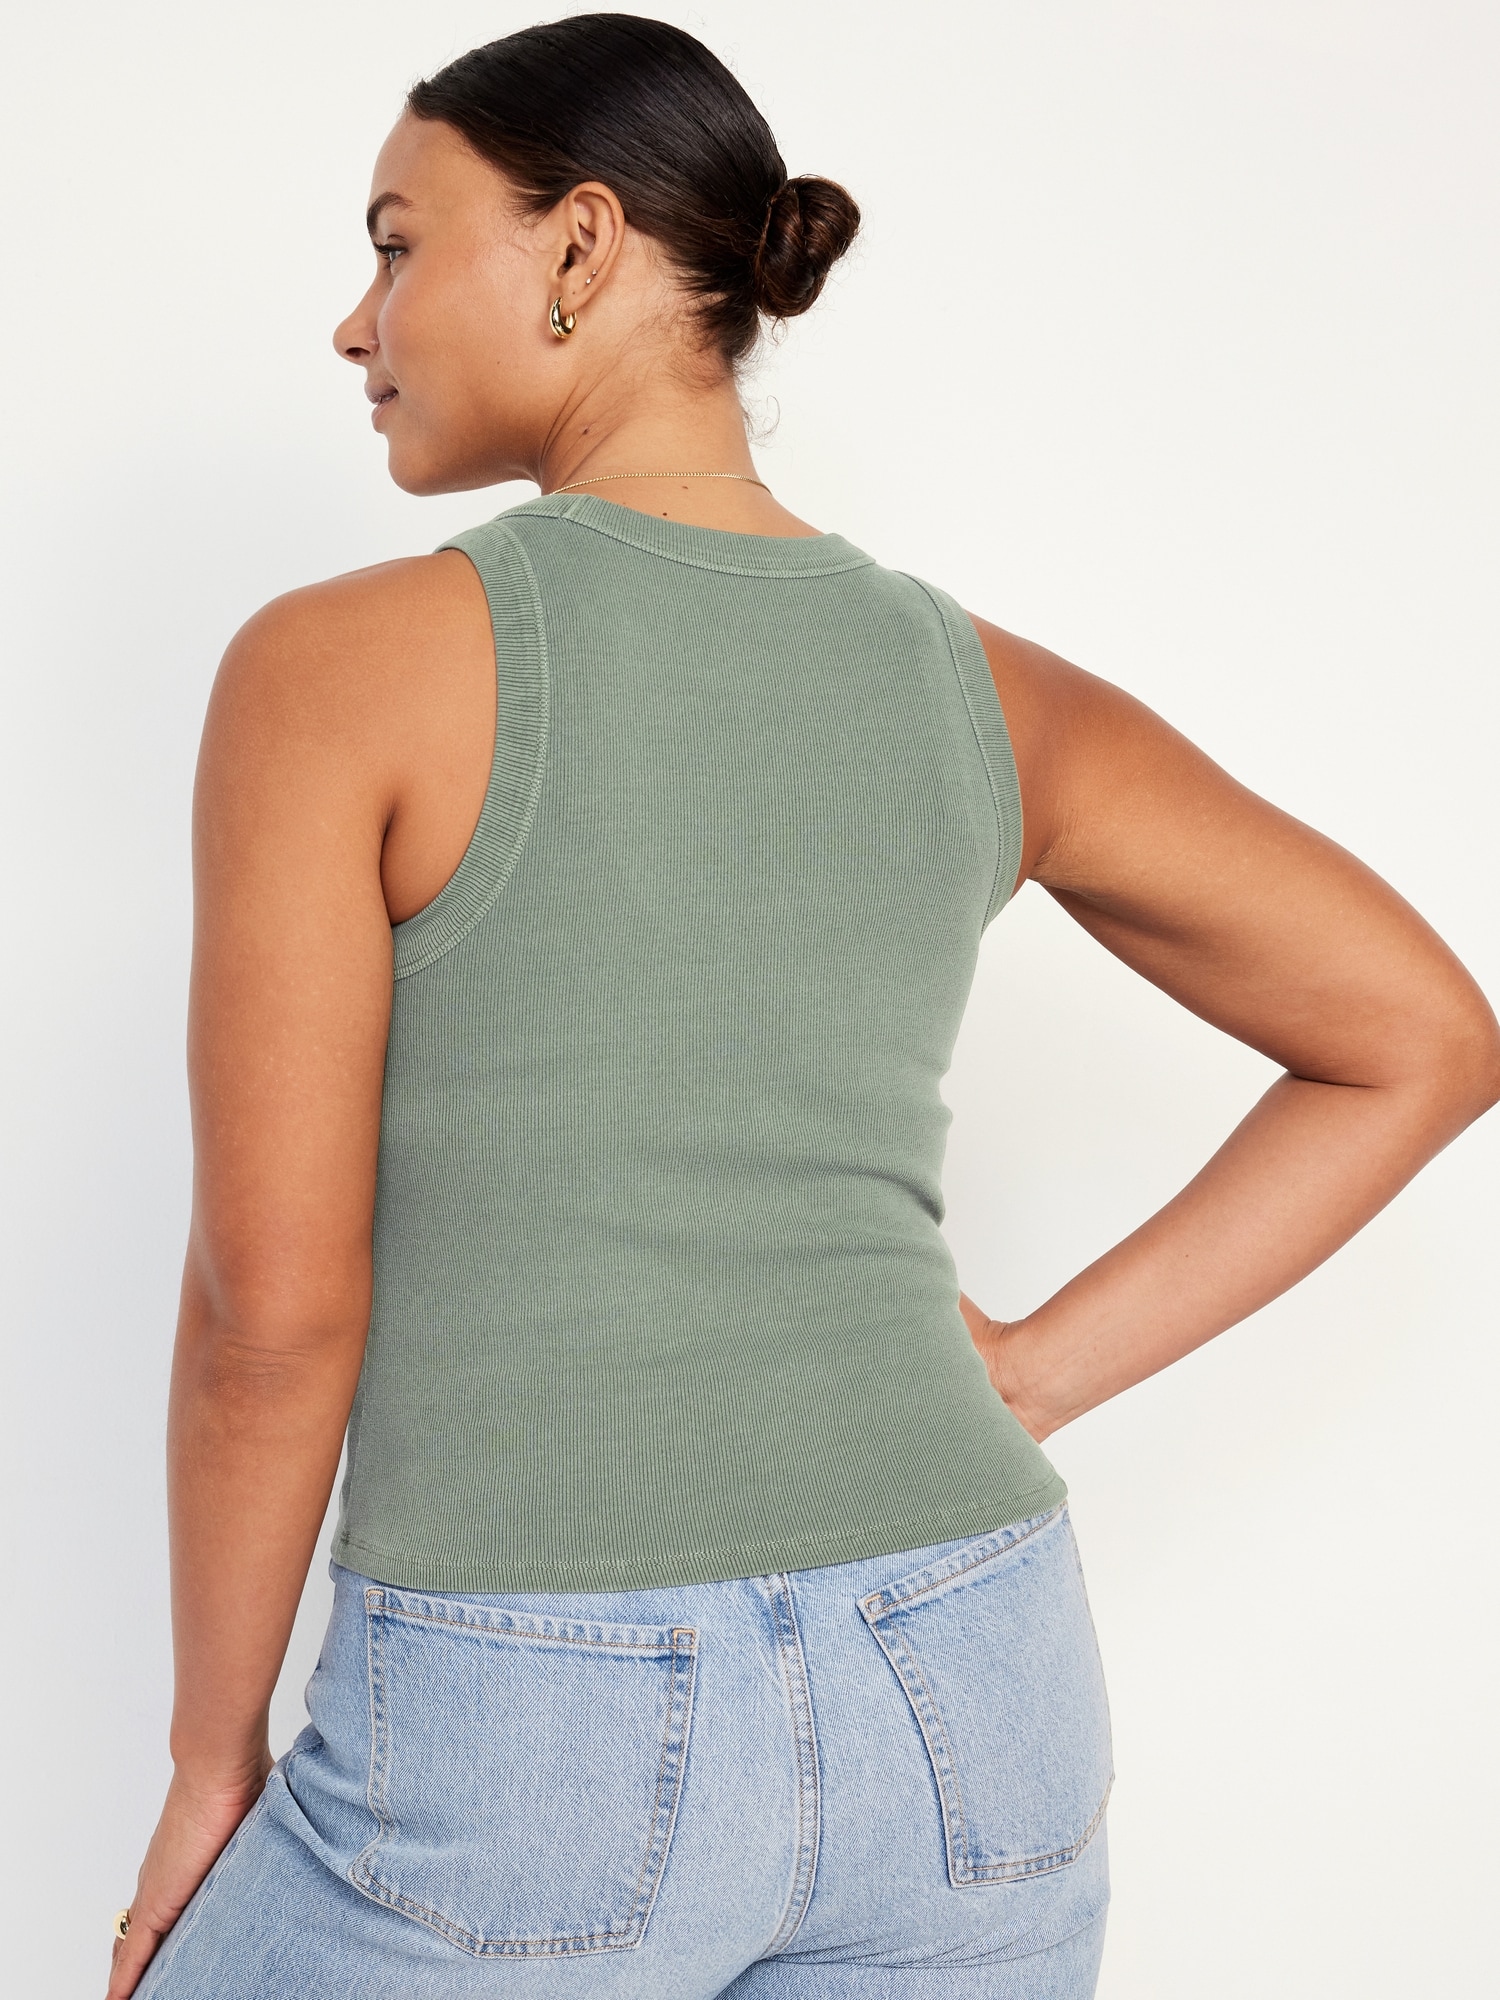 Snug Cropped Tank Top for Women